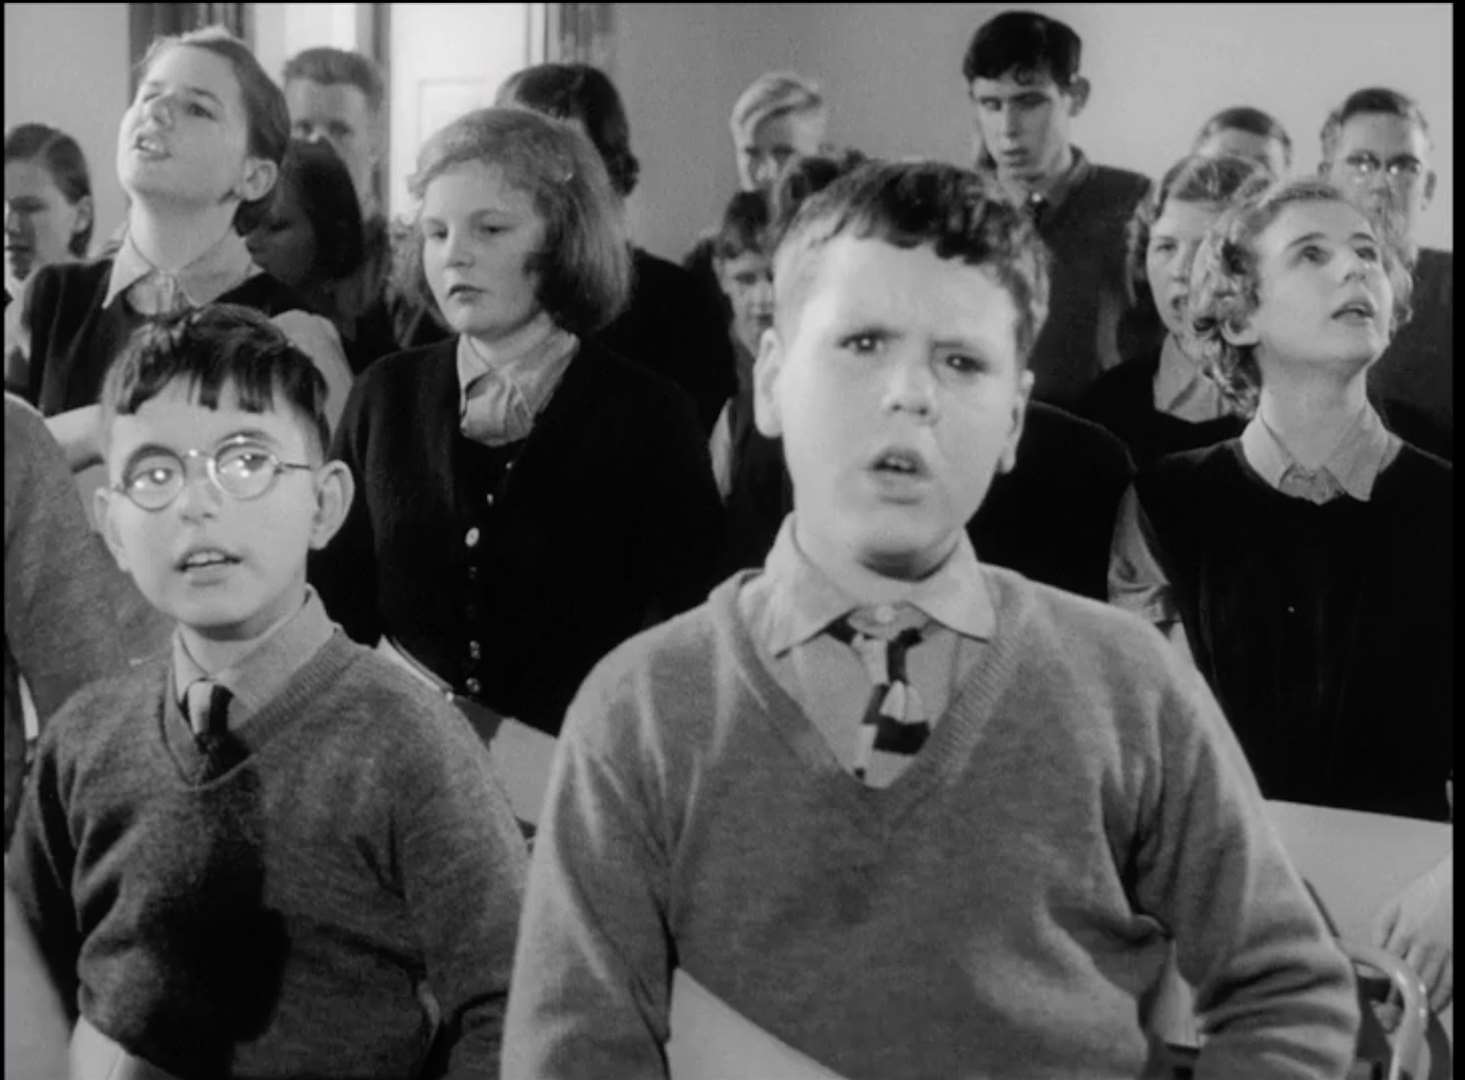 Taken from Eyes of a Child (1961). BFI National Archive/The National Archives